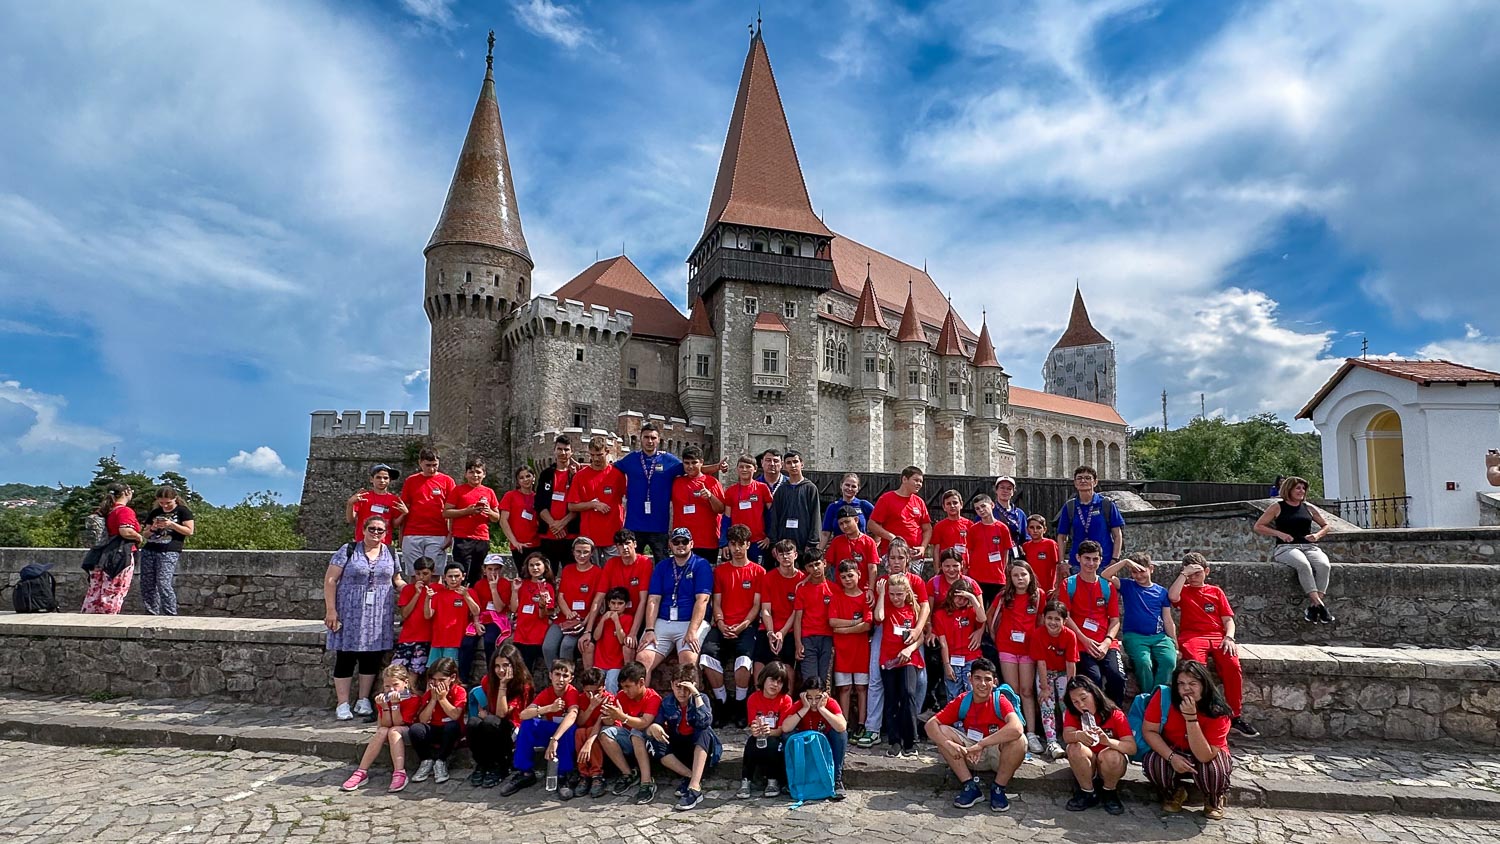 The children from Hope Partners Romania at Corvins Castle.